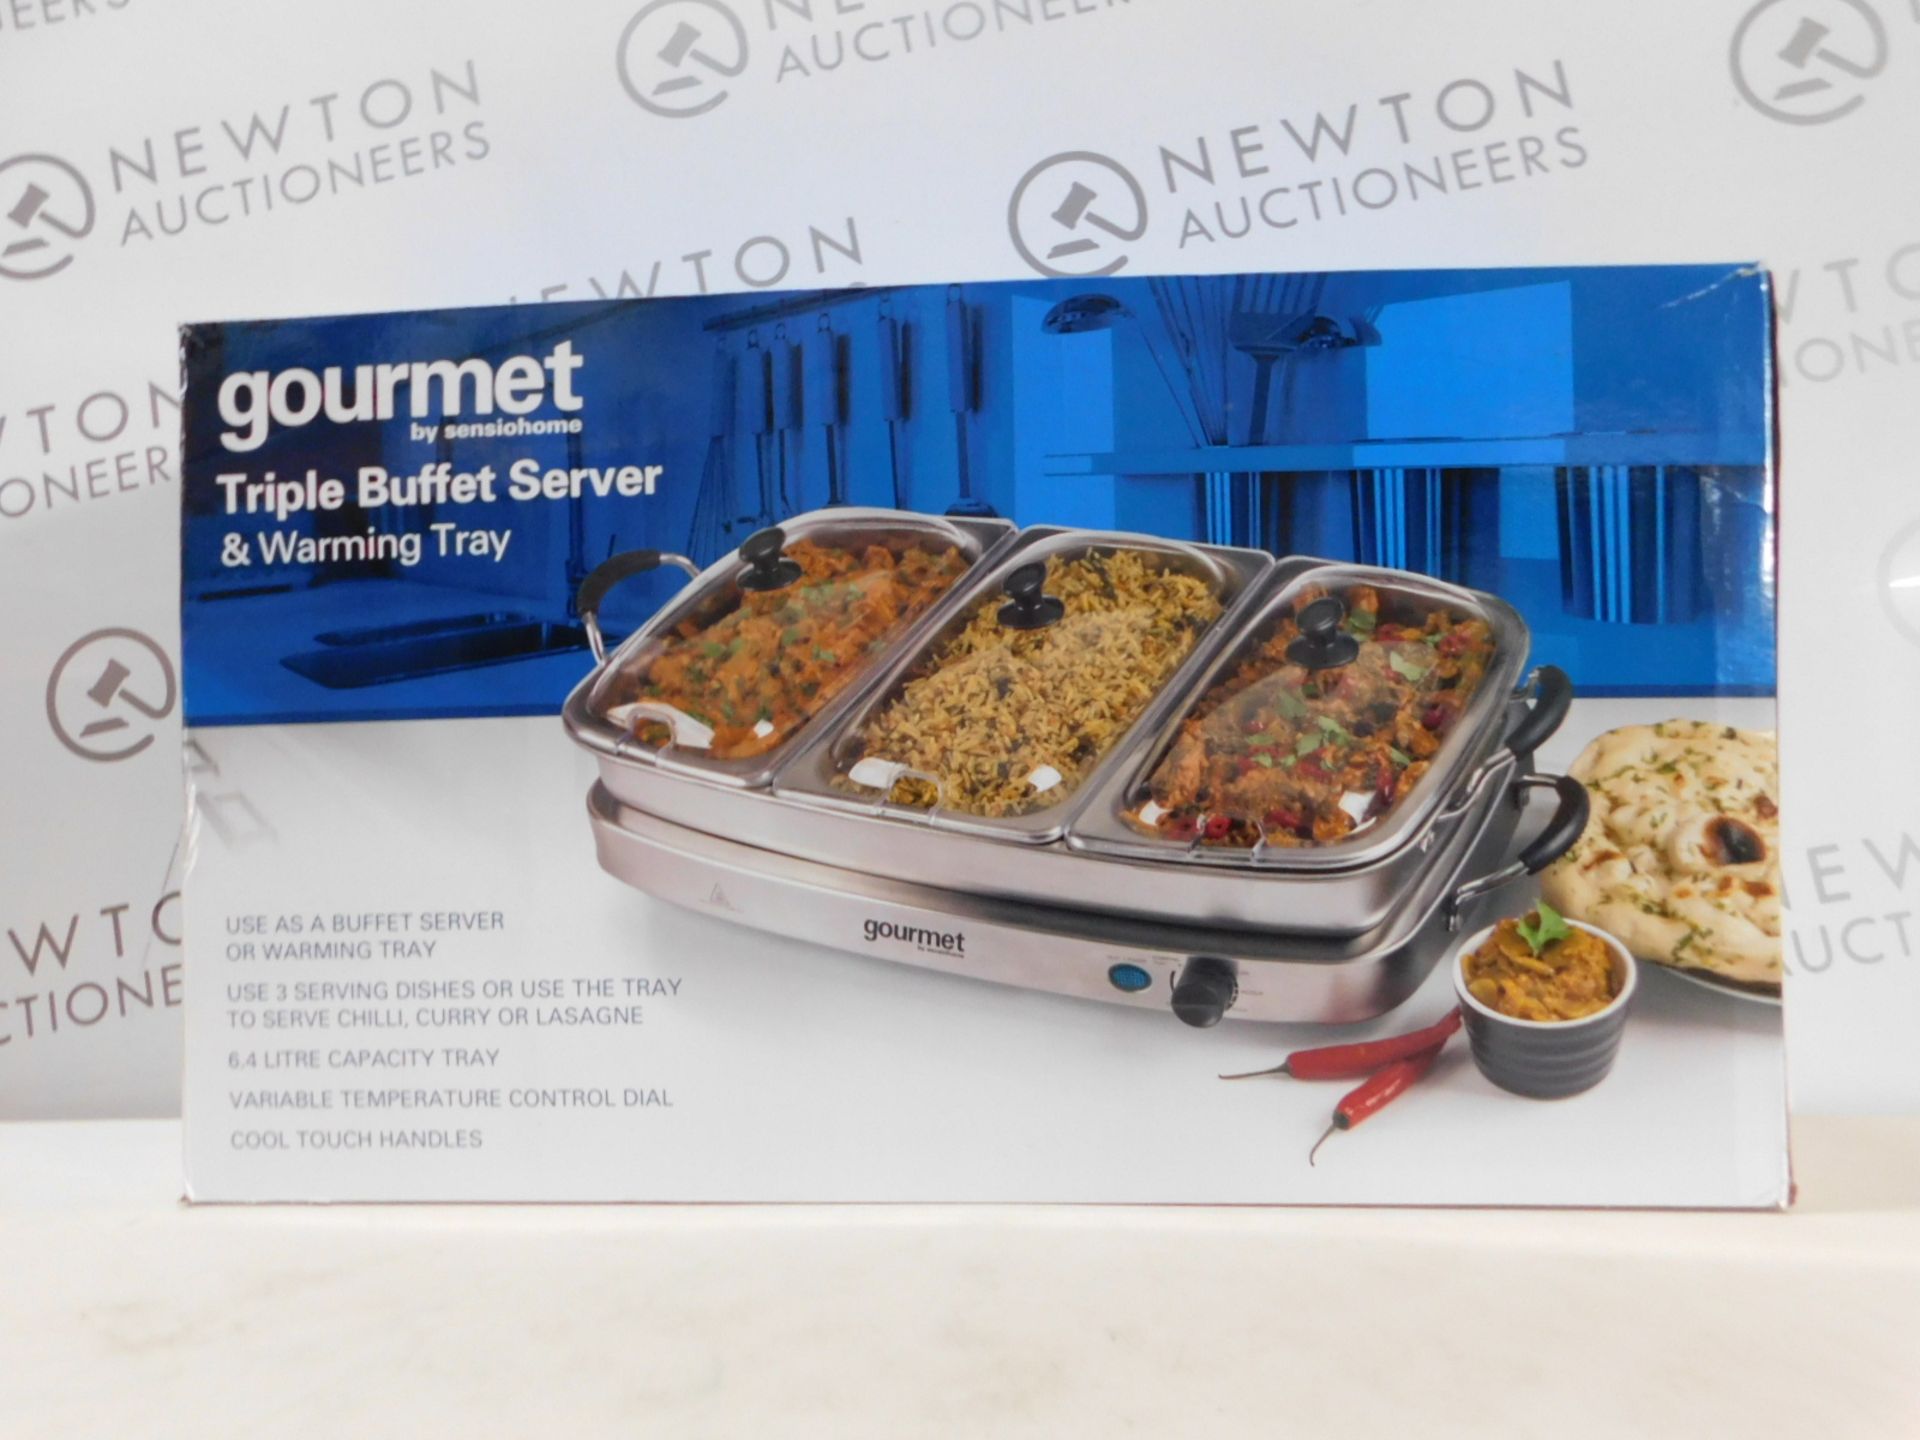 1 BOXED SENSIOHOME GOURMET TRIPLE BUFFET SERVER WITH WARMING TRAY RRP Â£49.99